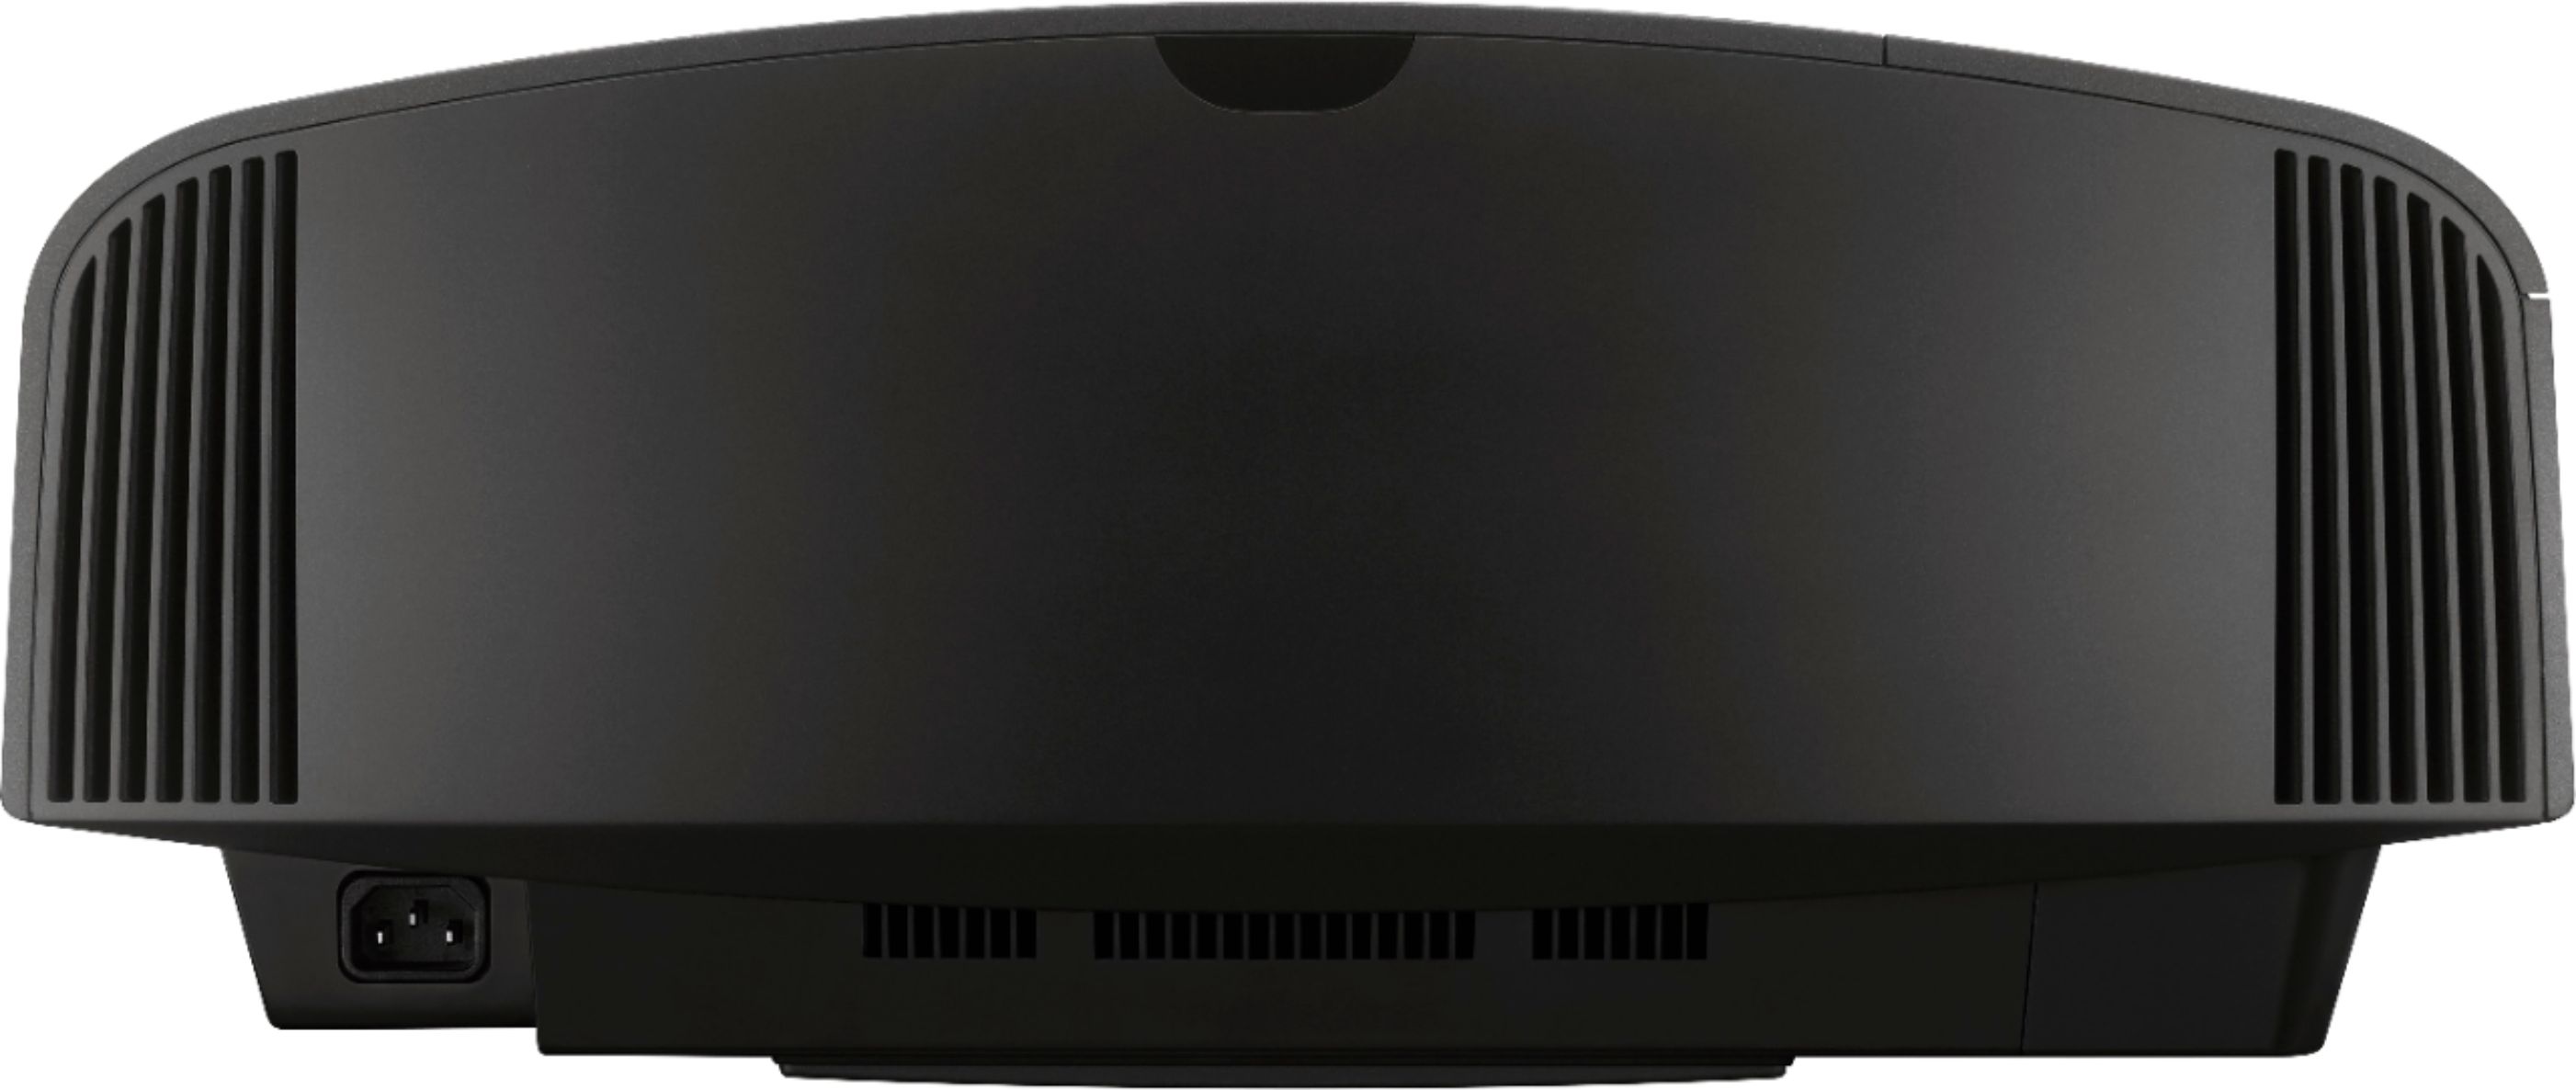 Back View: Sony - Premium 4K HDR Home Theater Projector - Black